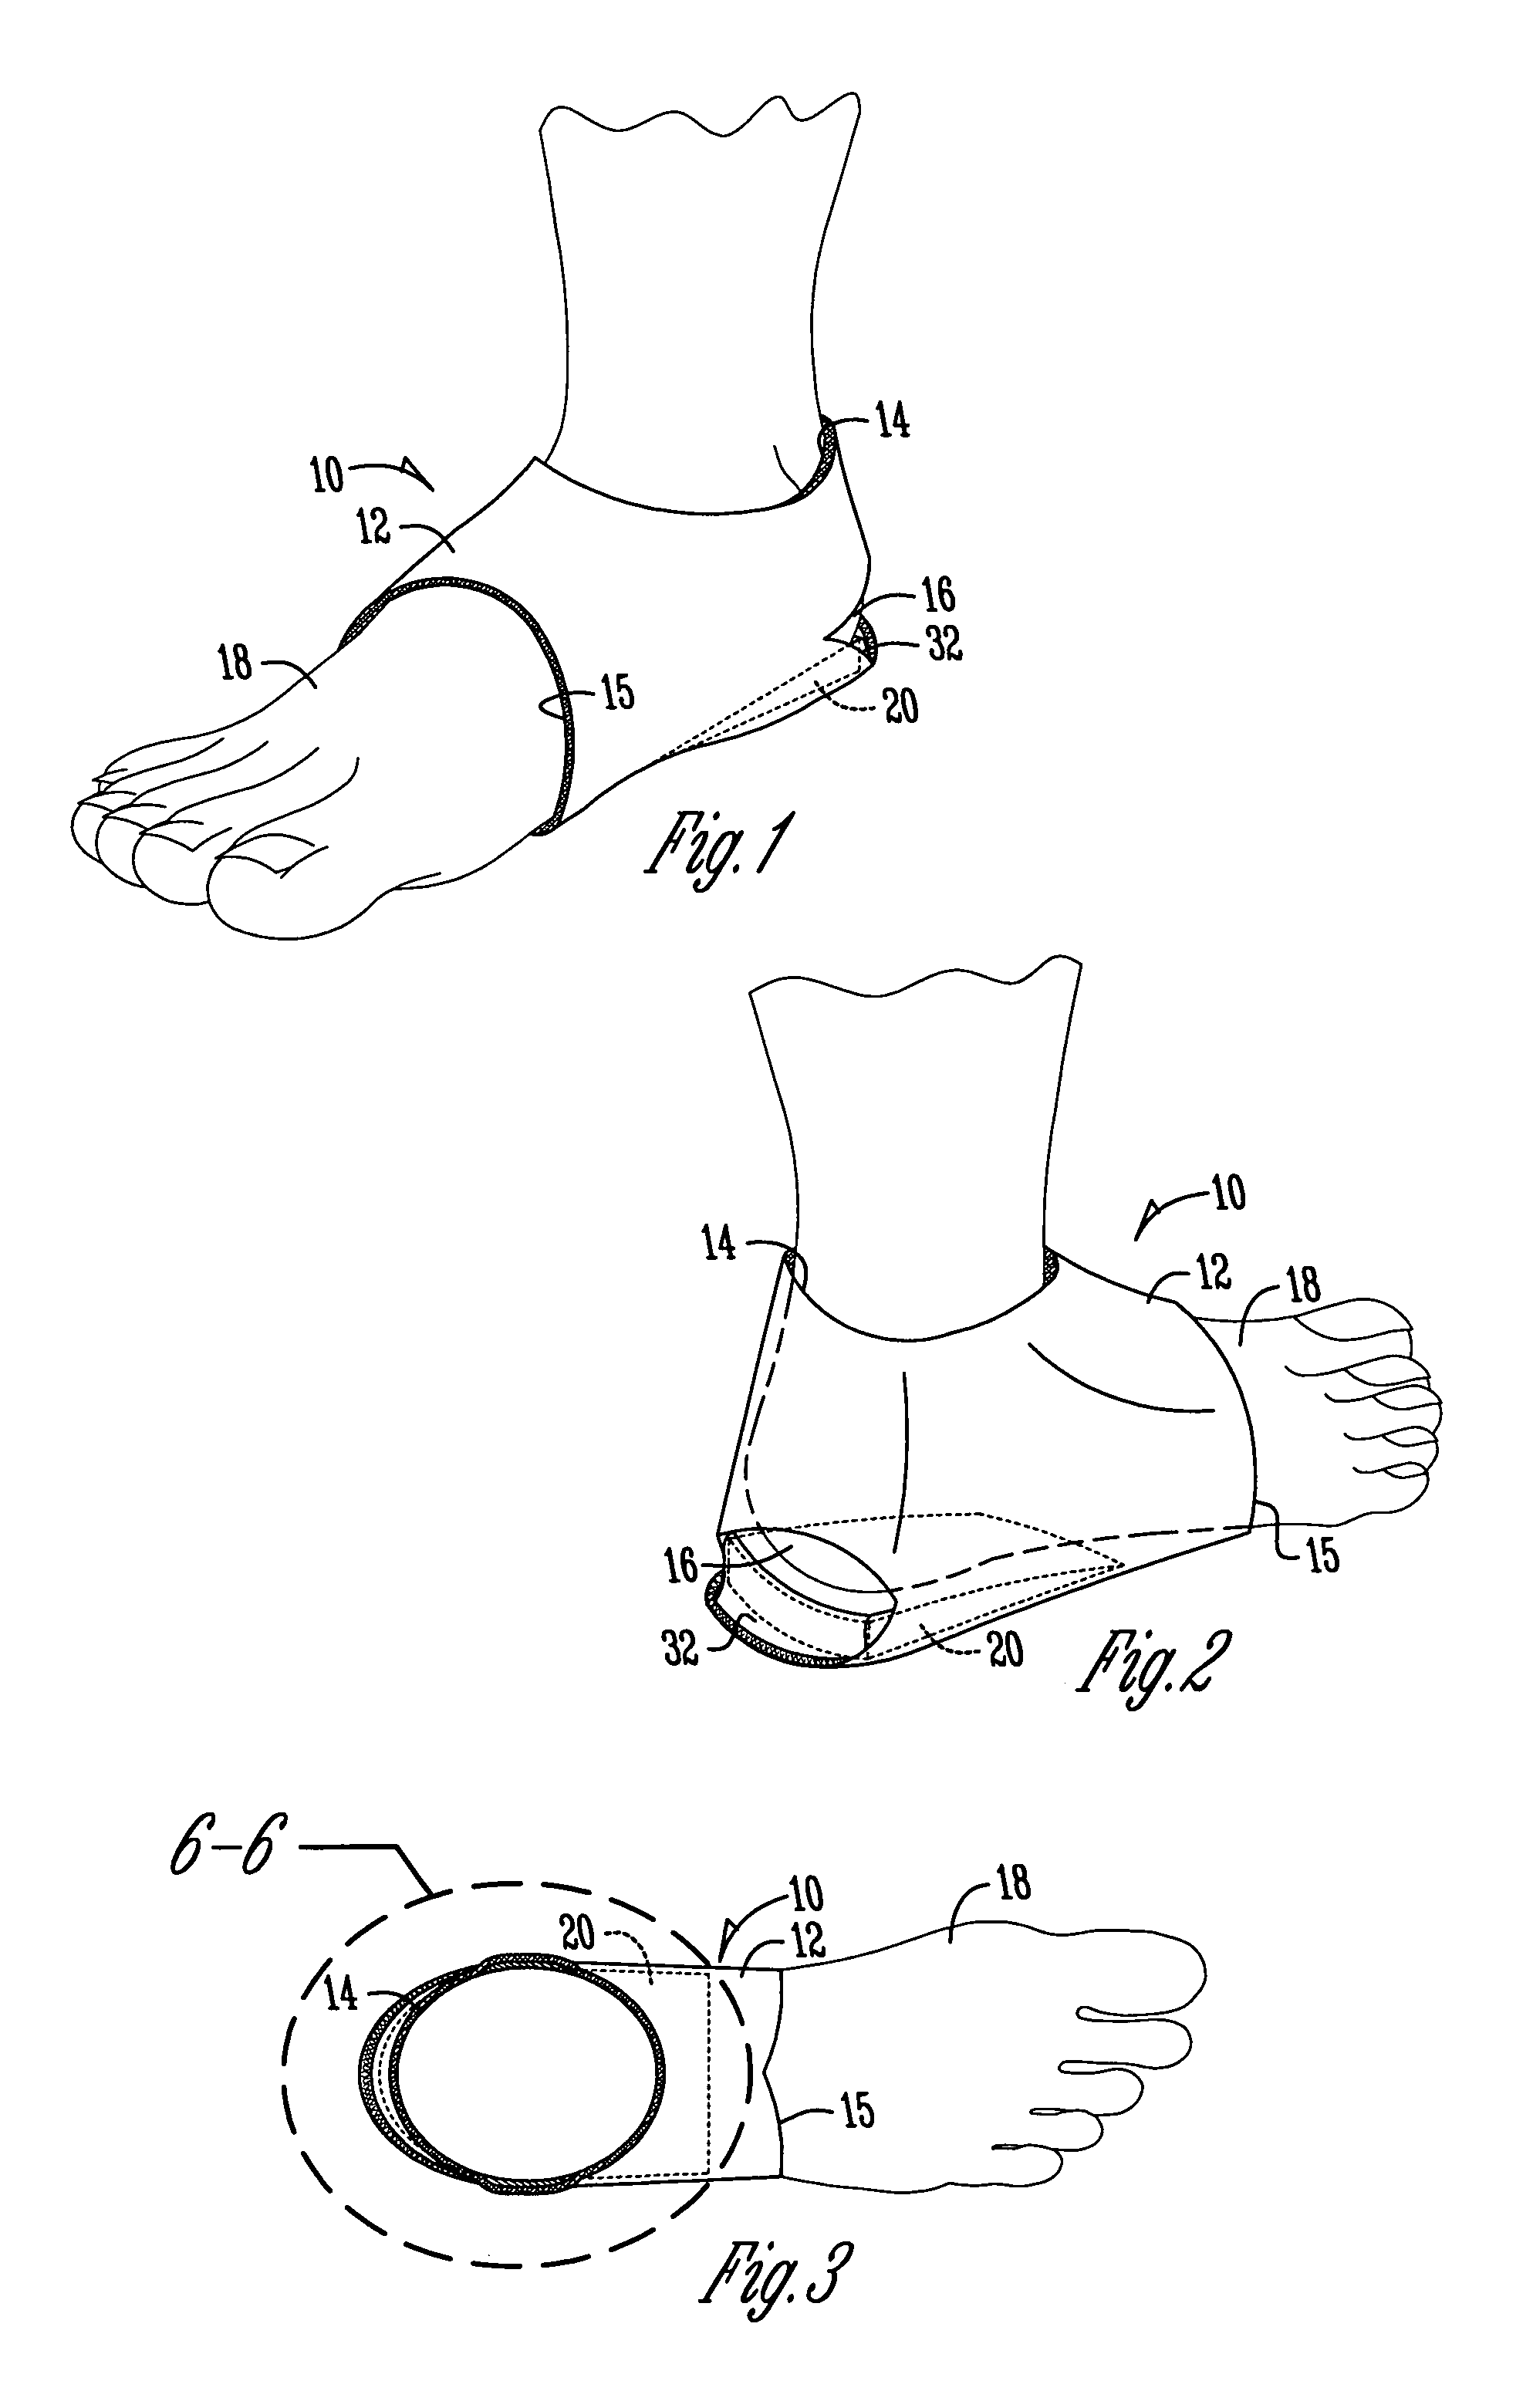 Device for heel shock absorption, swelling, and pain treatment